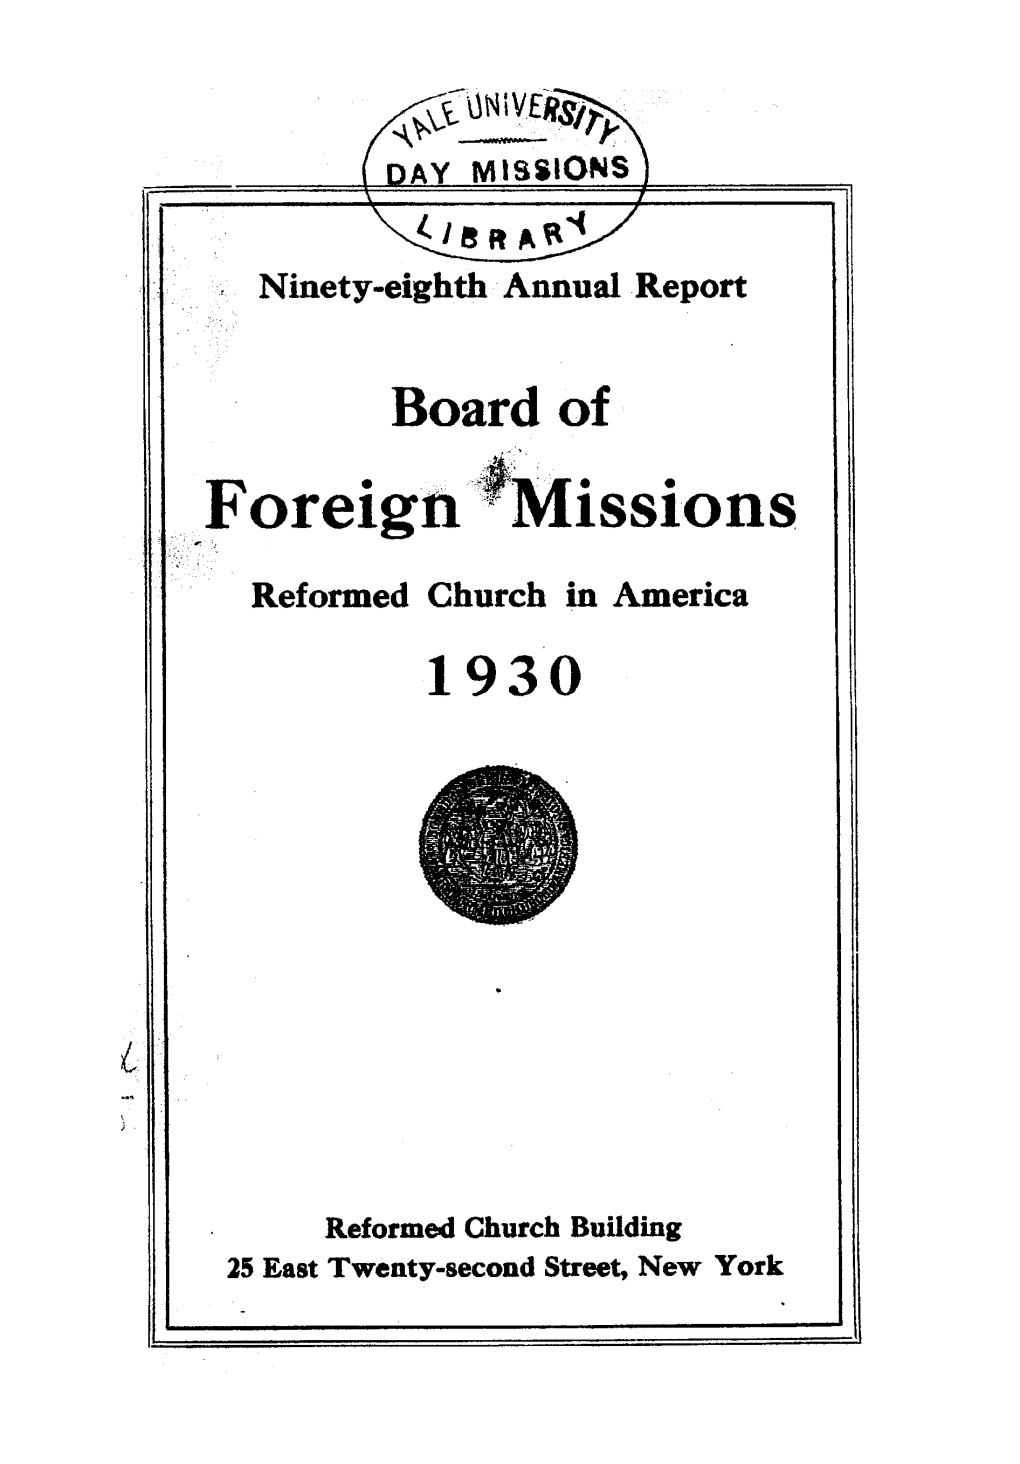 Foreign ^Missions Reformed Church in America 1930